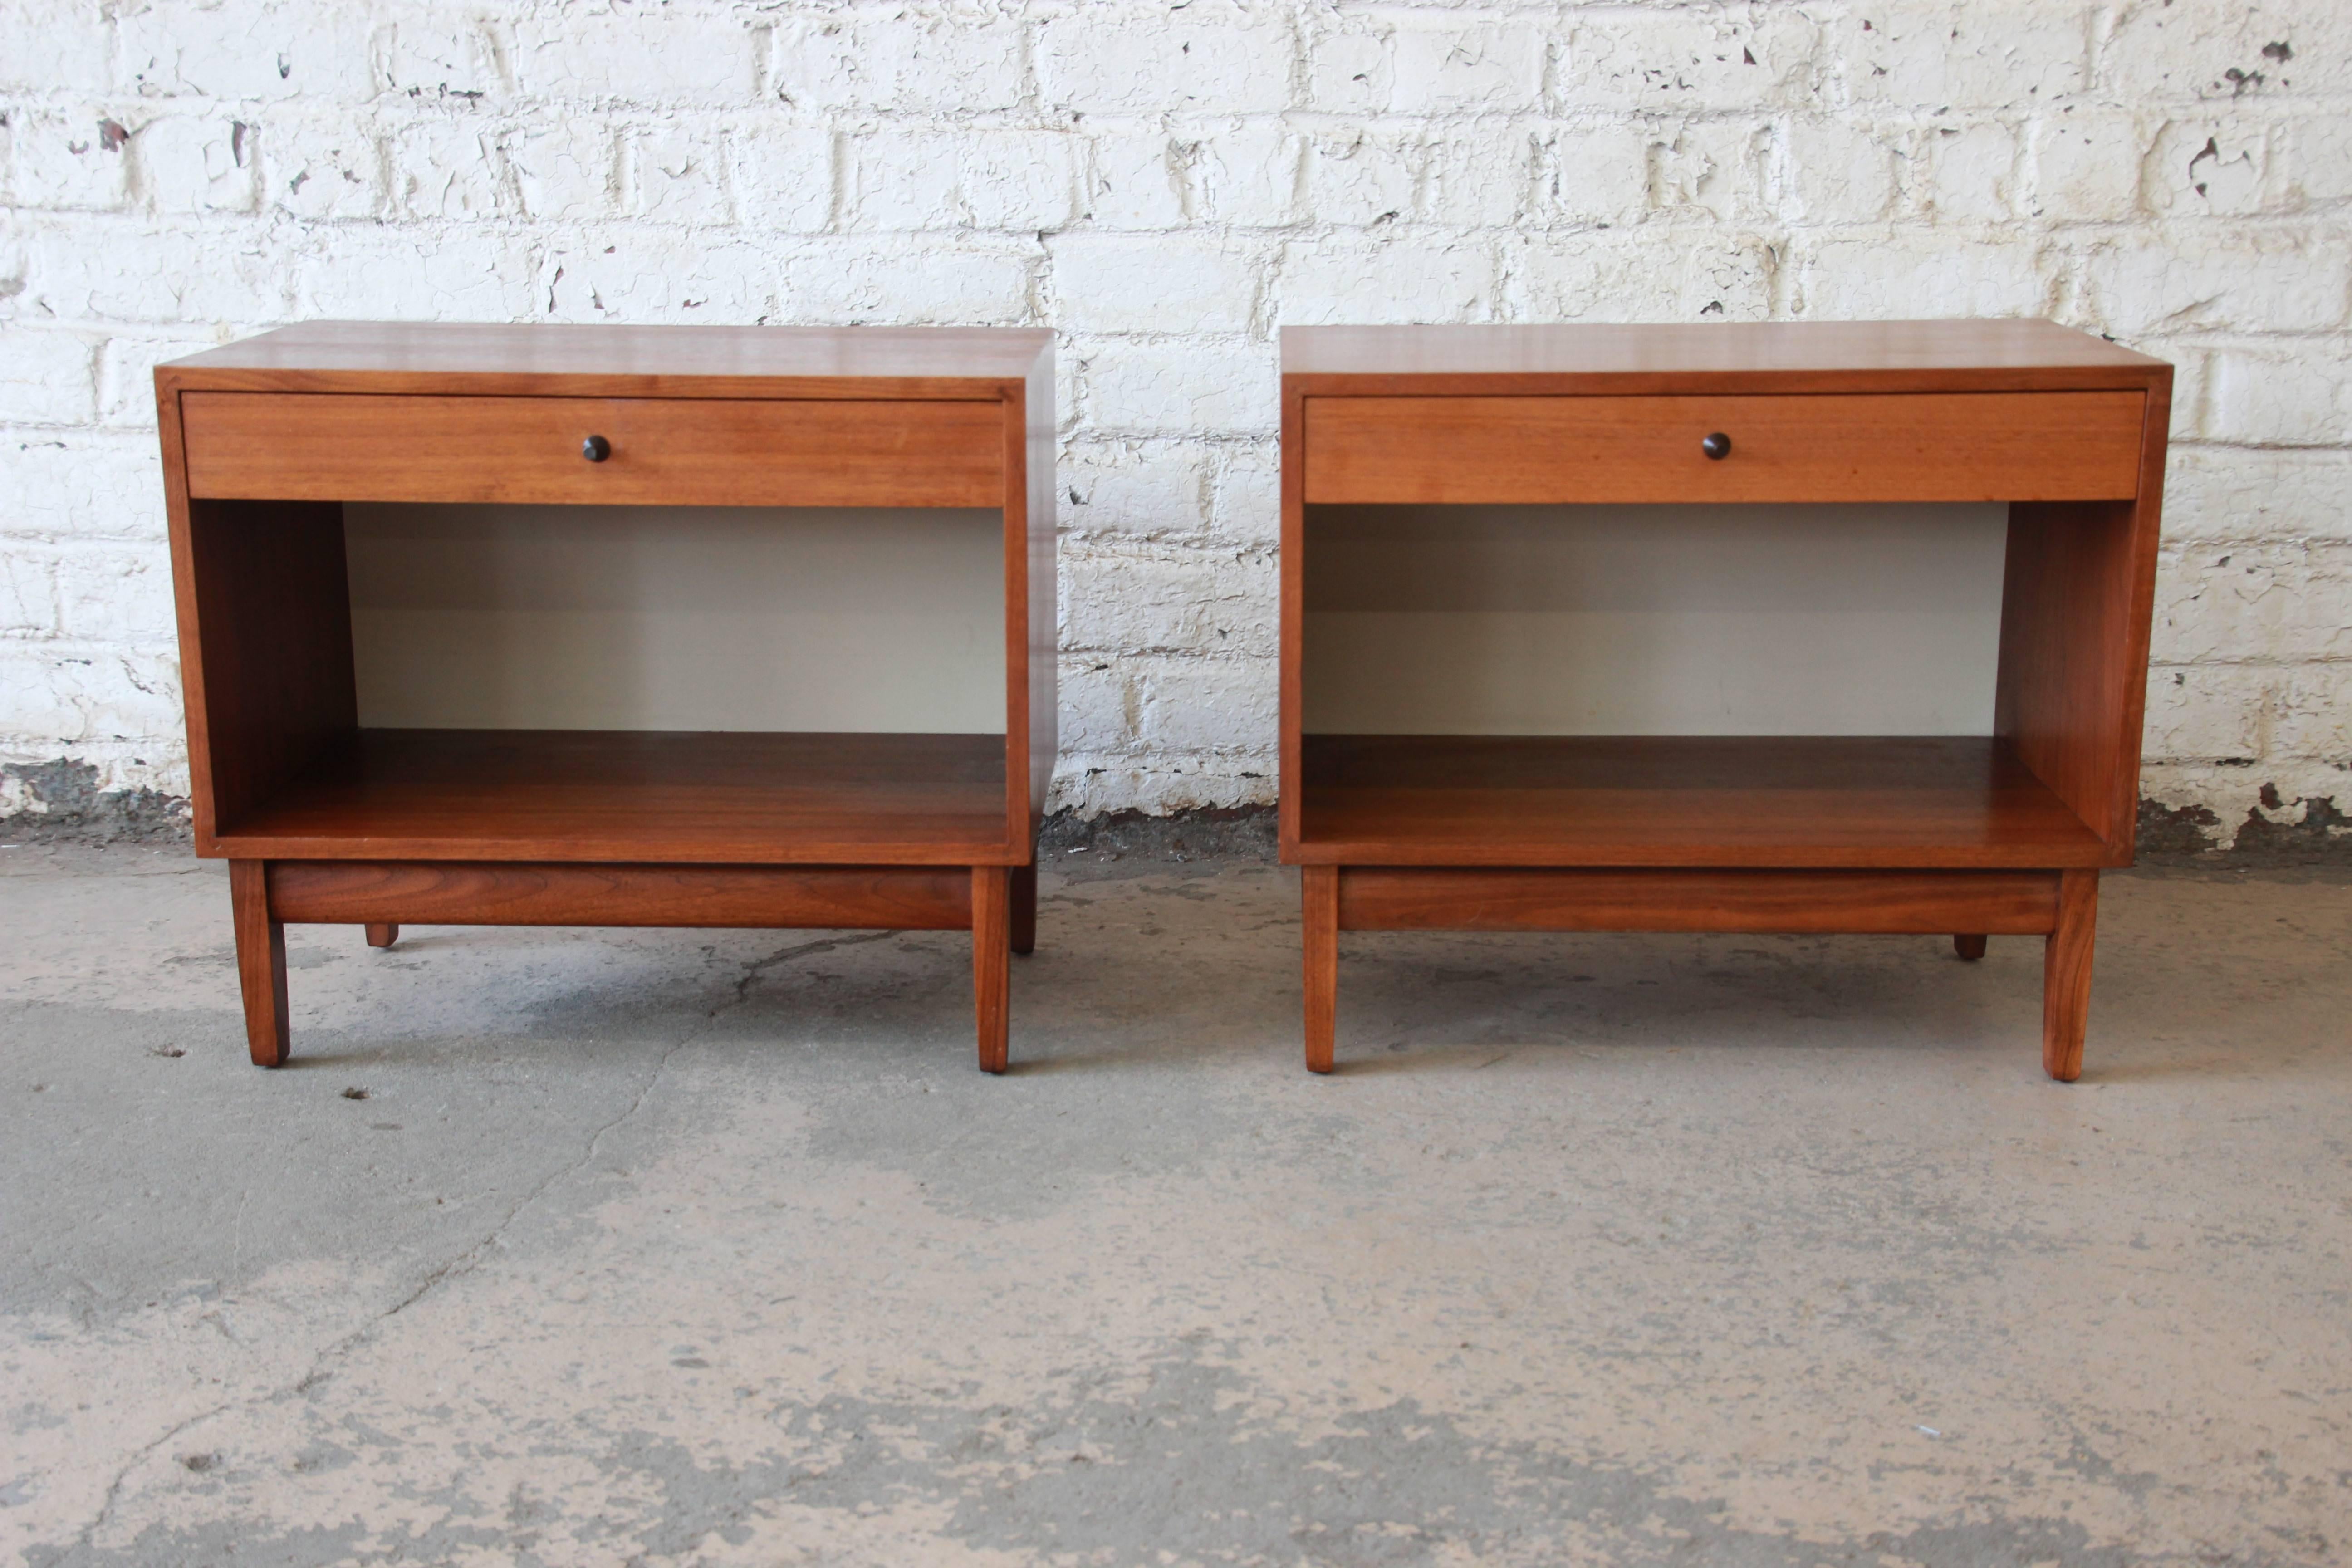 An outstanding pair of Mid-Century Modern walnut nightstands designed by Kipp Stewart for his American Design Foundation line for Calvin Furniture, circa 1950s. The nightstands feature gorgeous walnut wood grain and sleek mid-century design. They